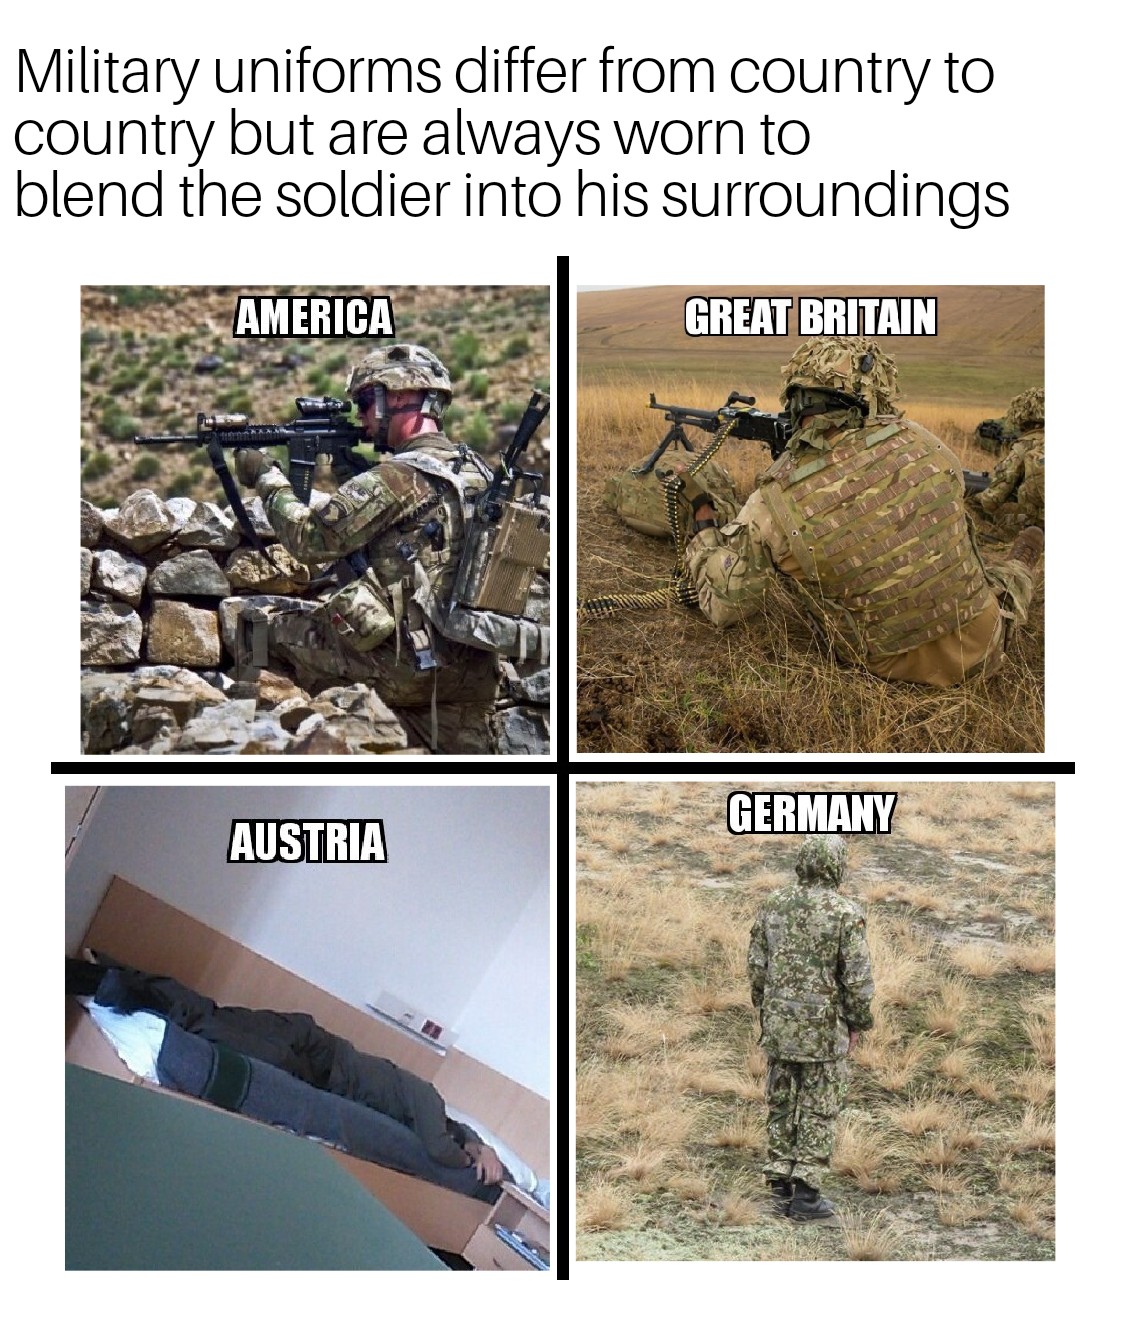 Meme about how different countries have different camouflage but Austria it is sleeping person on the couch